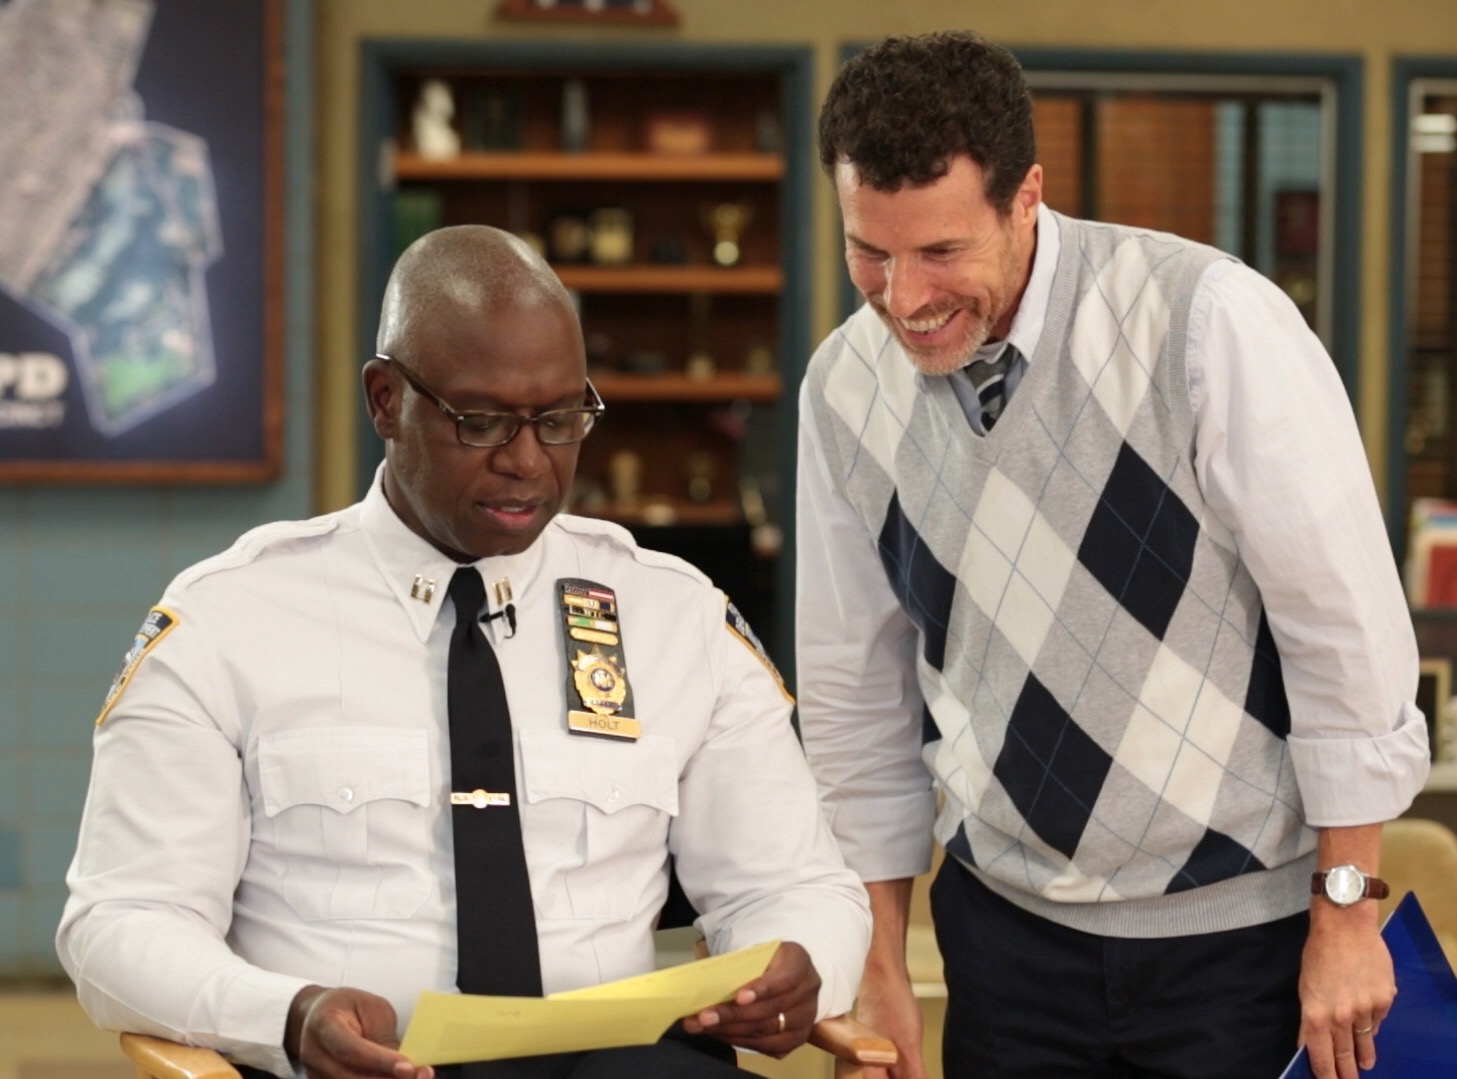 Brian Kahn and Andre Braugher on set of 